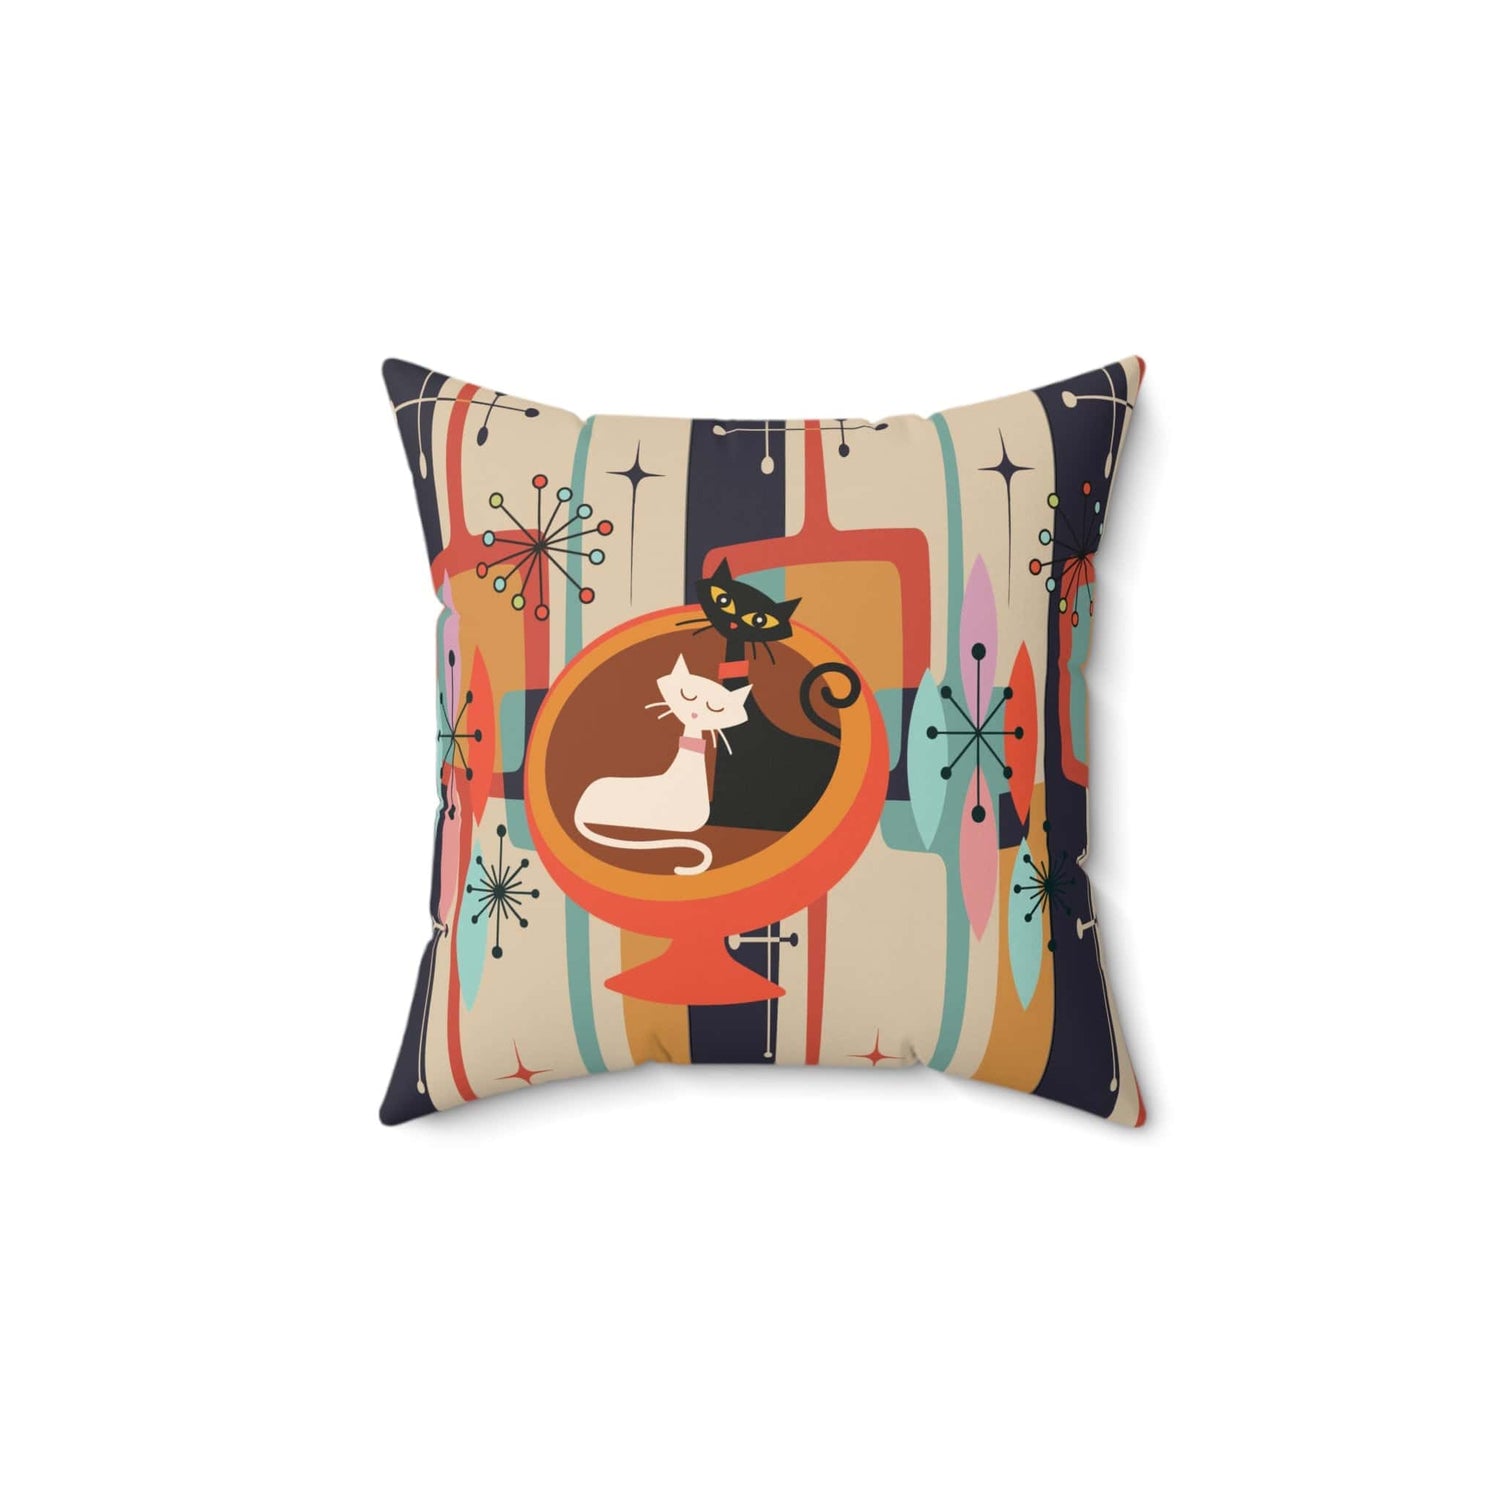 Kate McEnroe New York Groovy Mid Century Modern Atomic Cat Egg Chair Throw Pillow with InsertThrow Pillows24228638806815651089